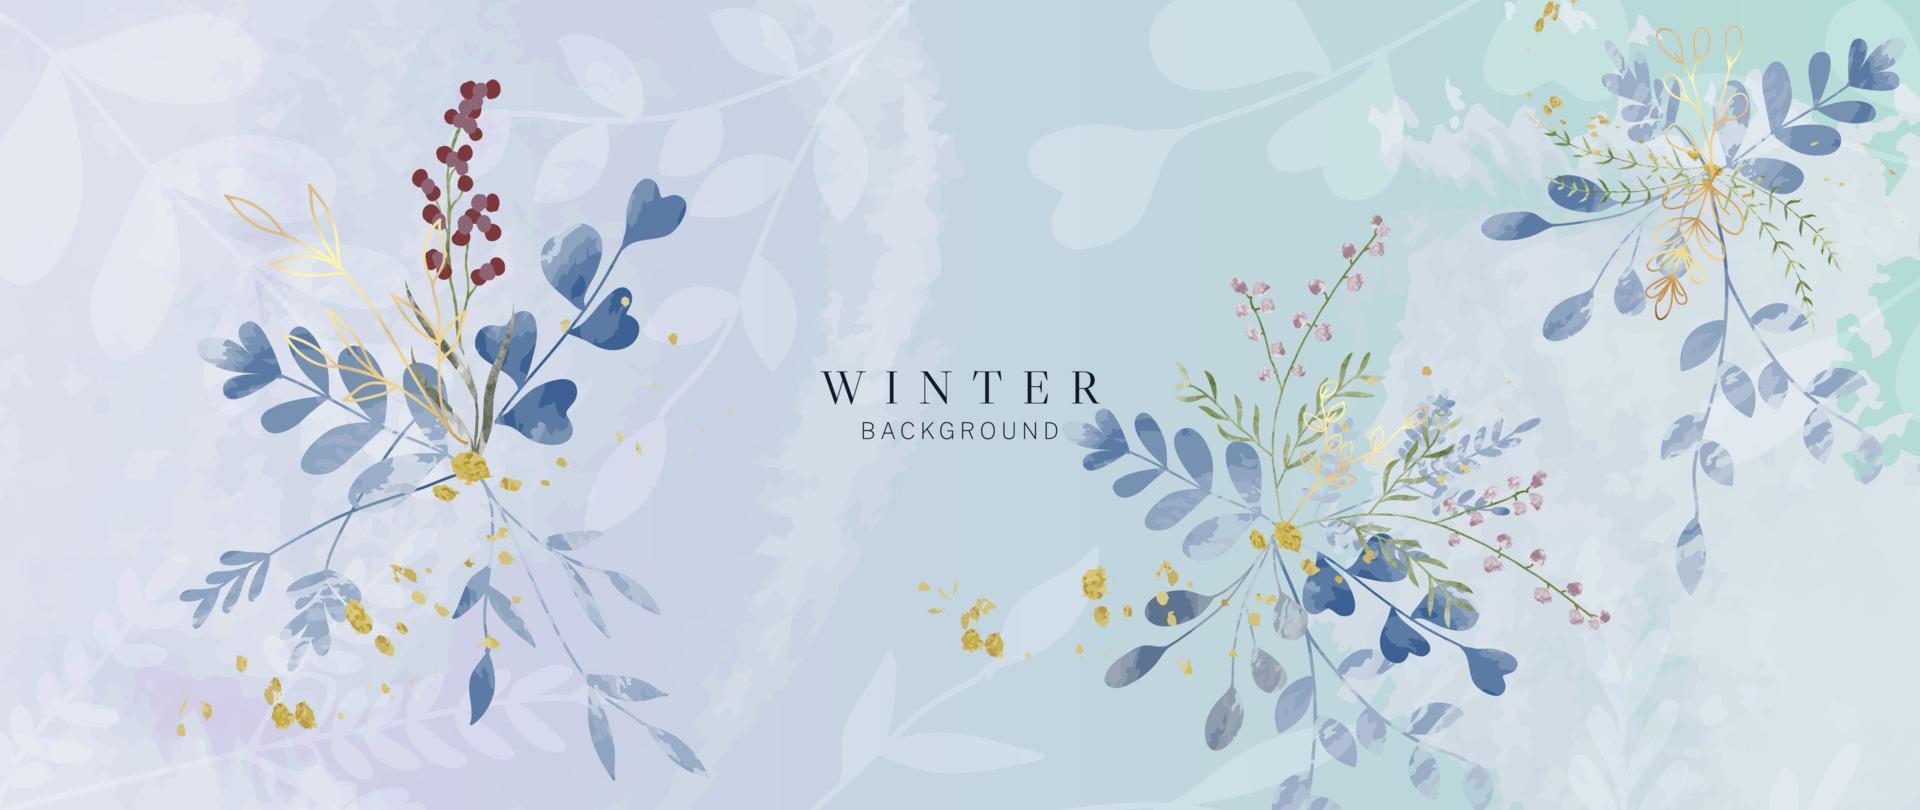 Watercolor abstract winter botanical background vector illustration. Hand painted watercolor winter wild leaf branch with gold texture line art. Design for poster, wallpaper, banner, card, decoration.